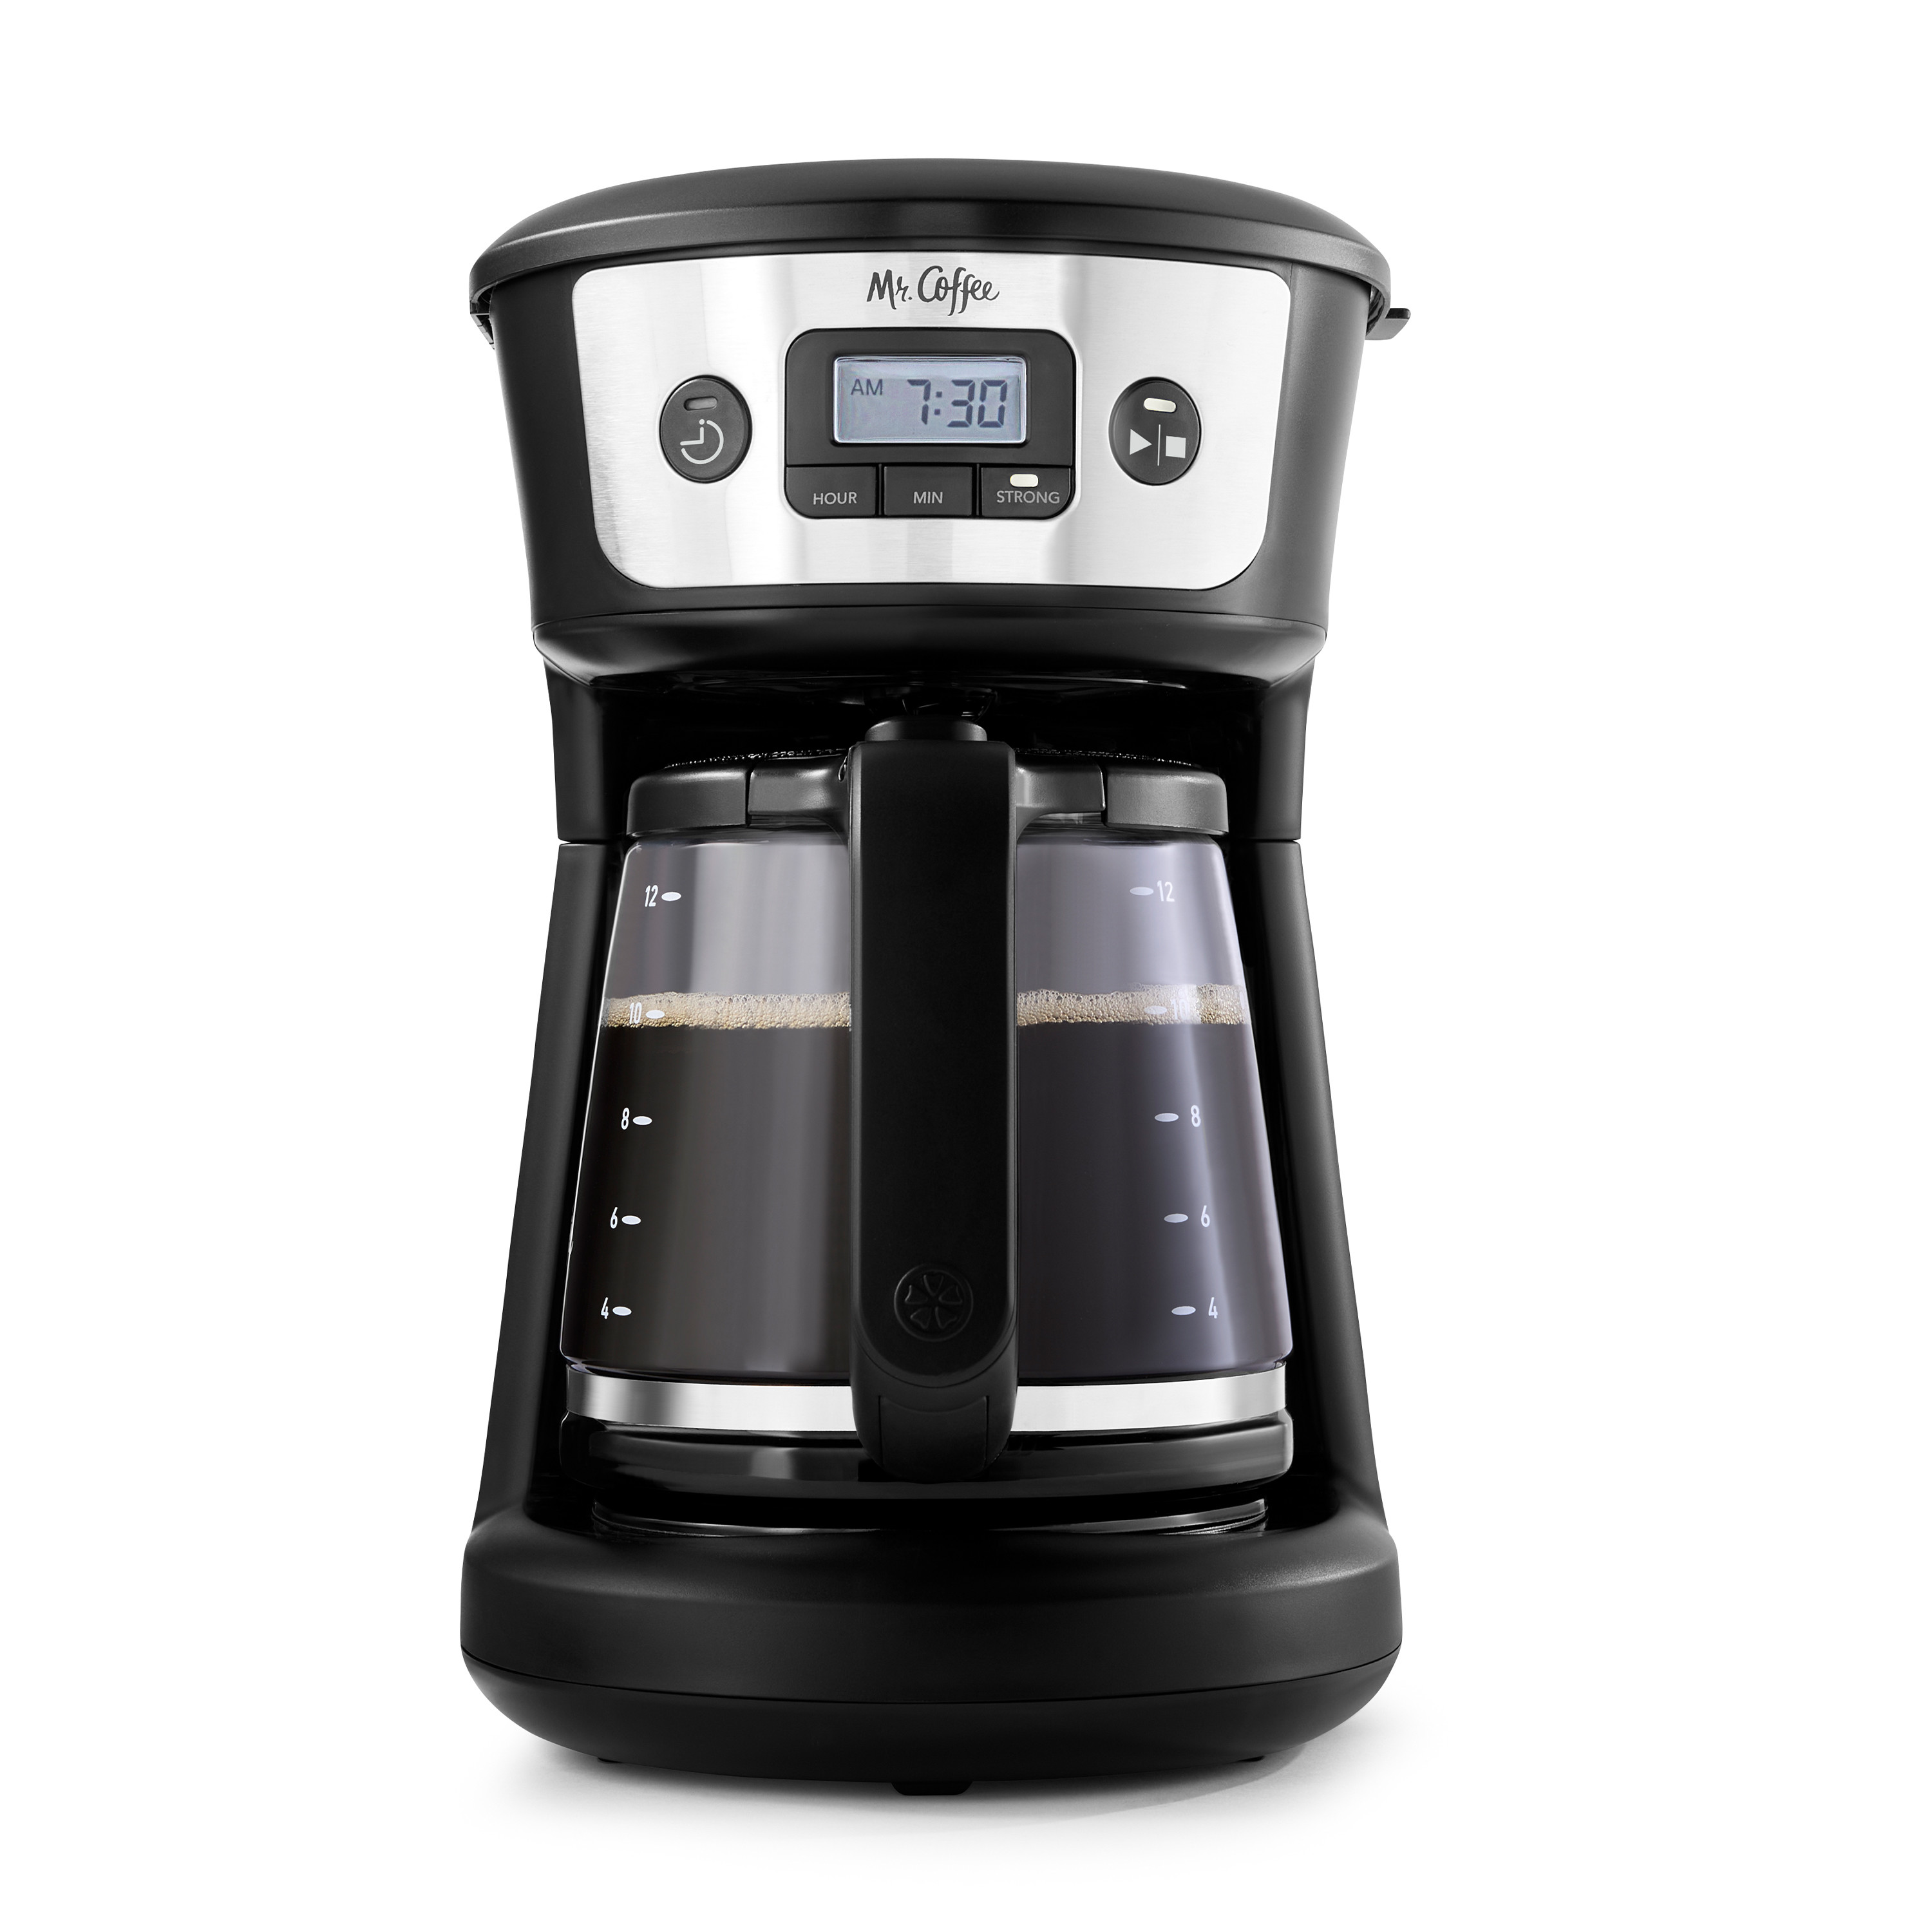 Mr. Coffee® 12-Cup Programmable Coffee Maker with Strong Brew Selector, Stainless Steel - image 1 of 10